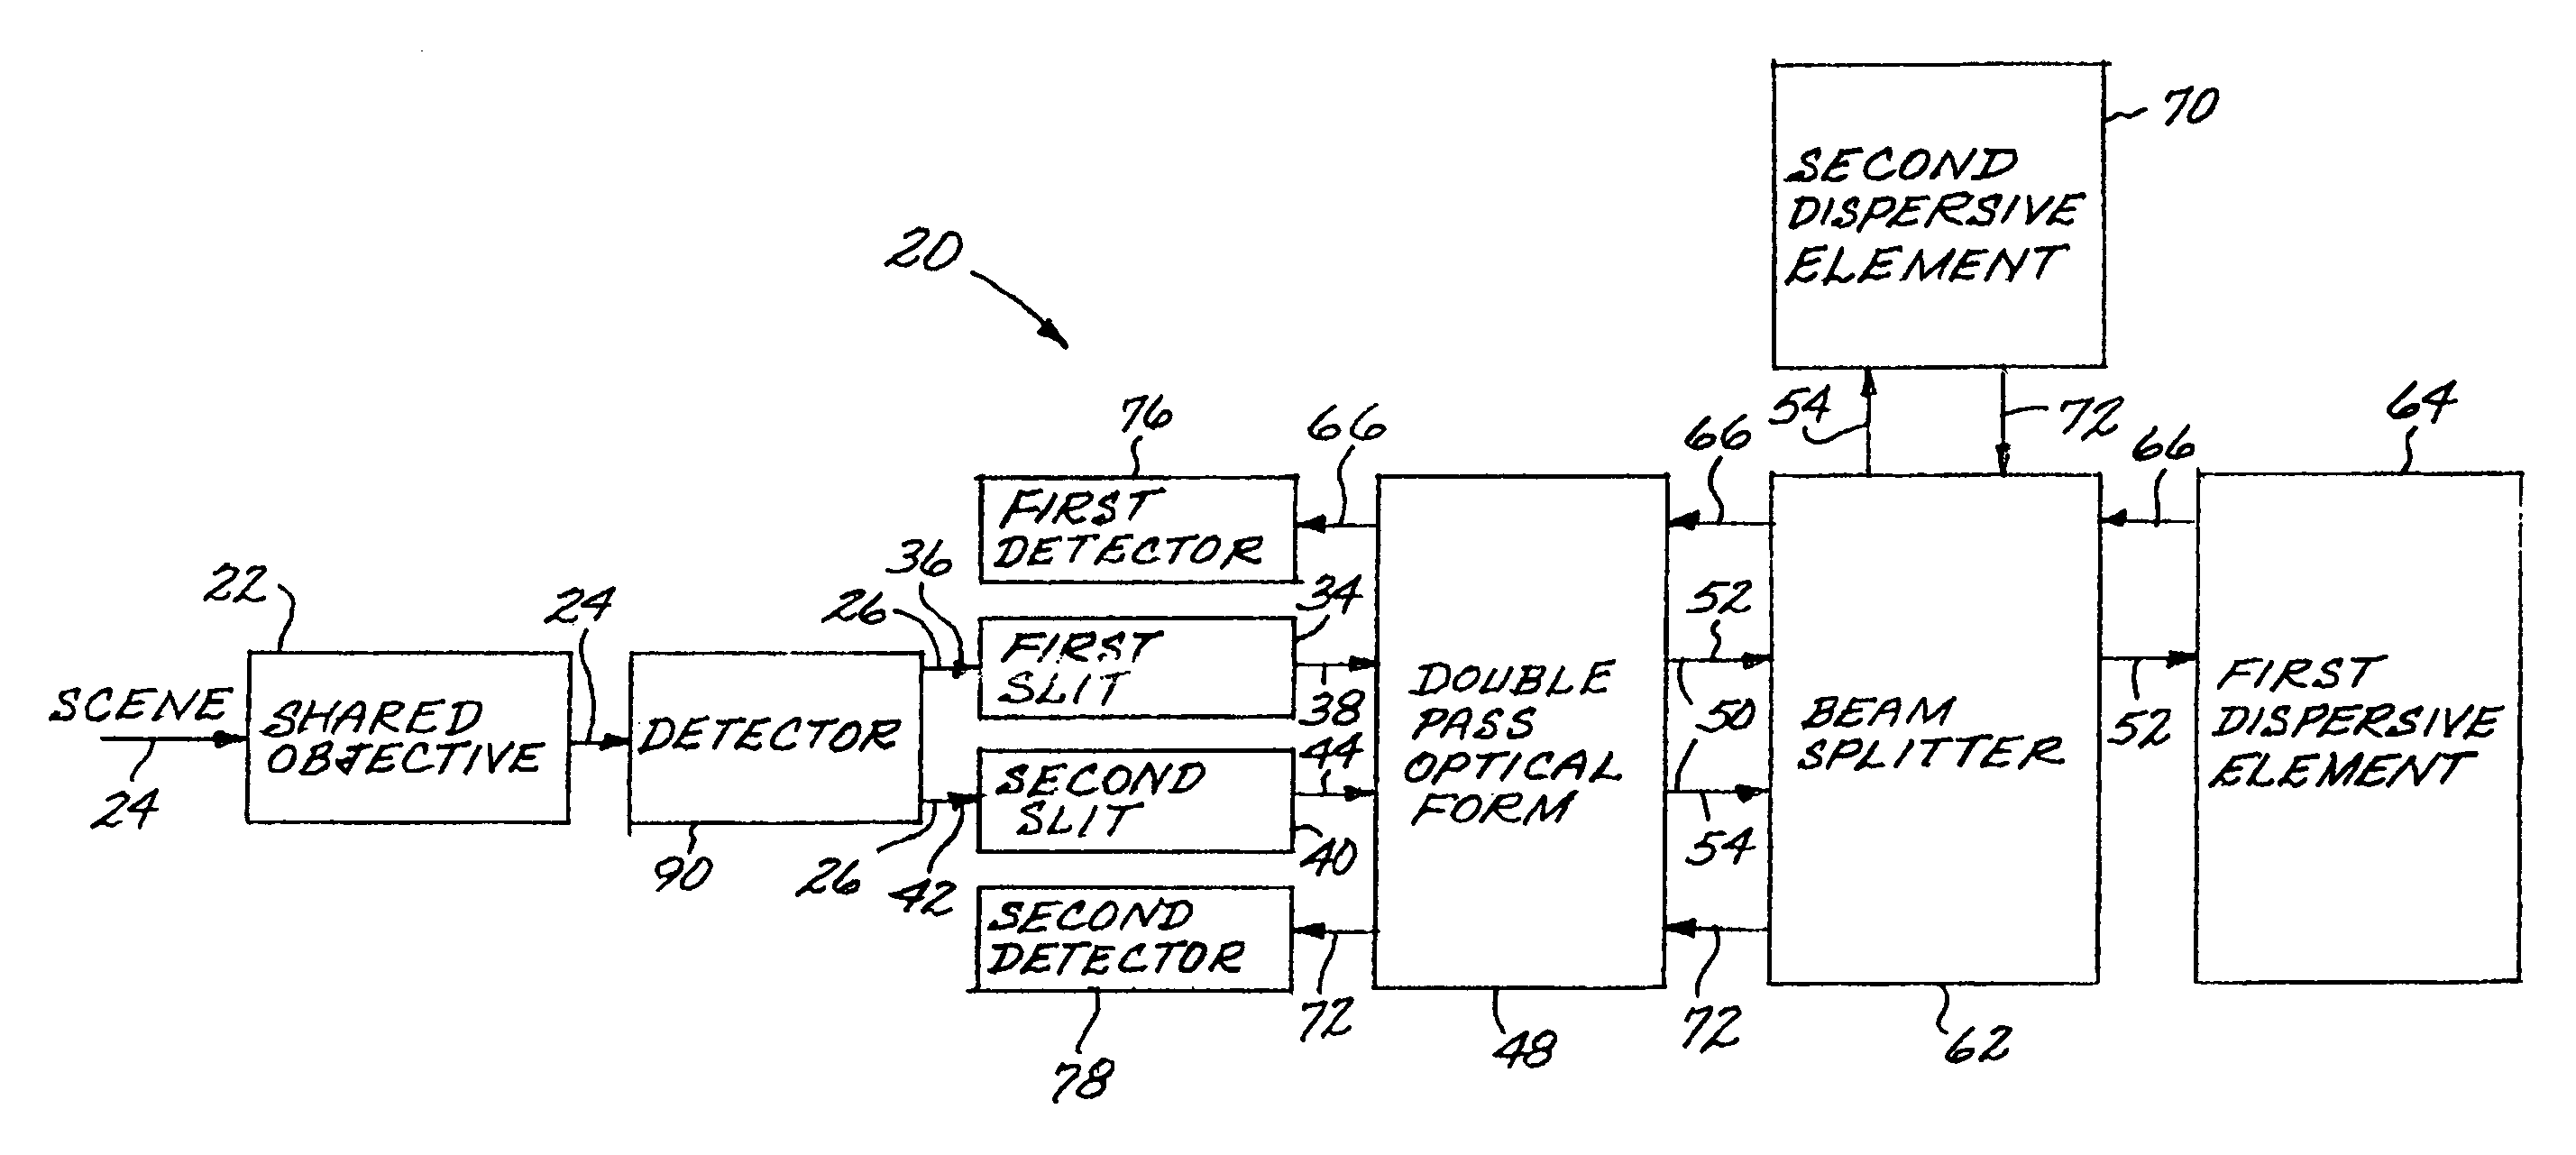 Two-channel imaging spectrometer utilizing shared objective, collimating, and imaging optics